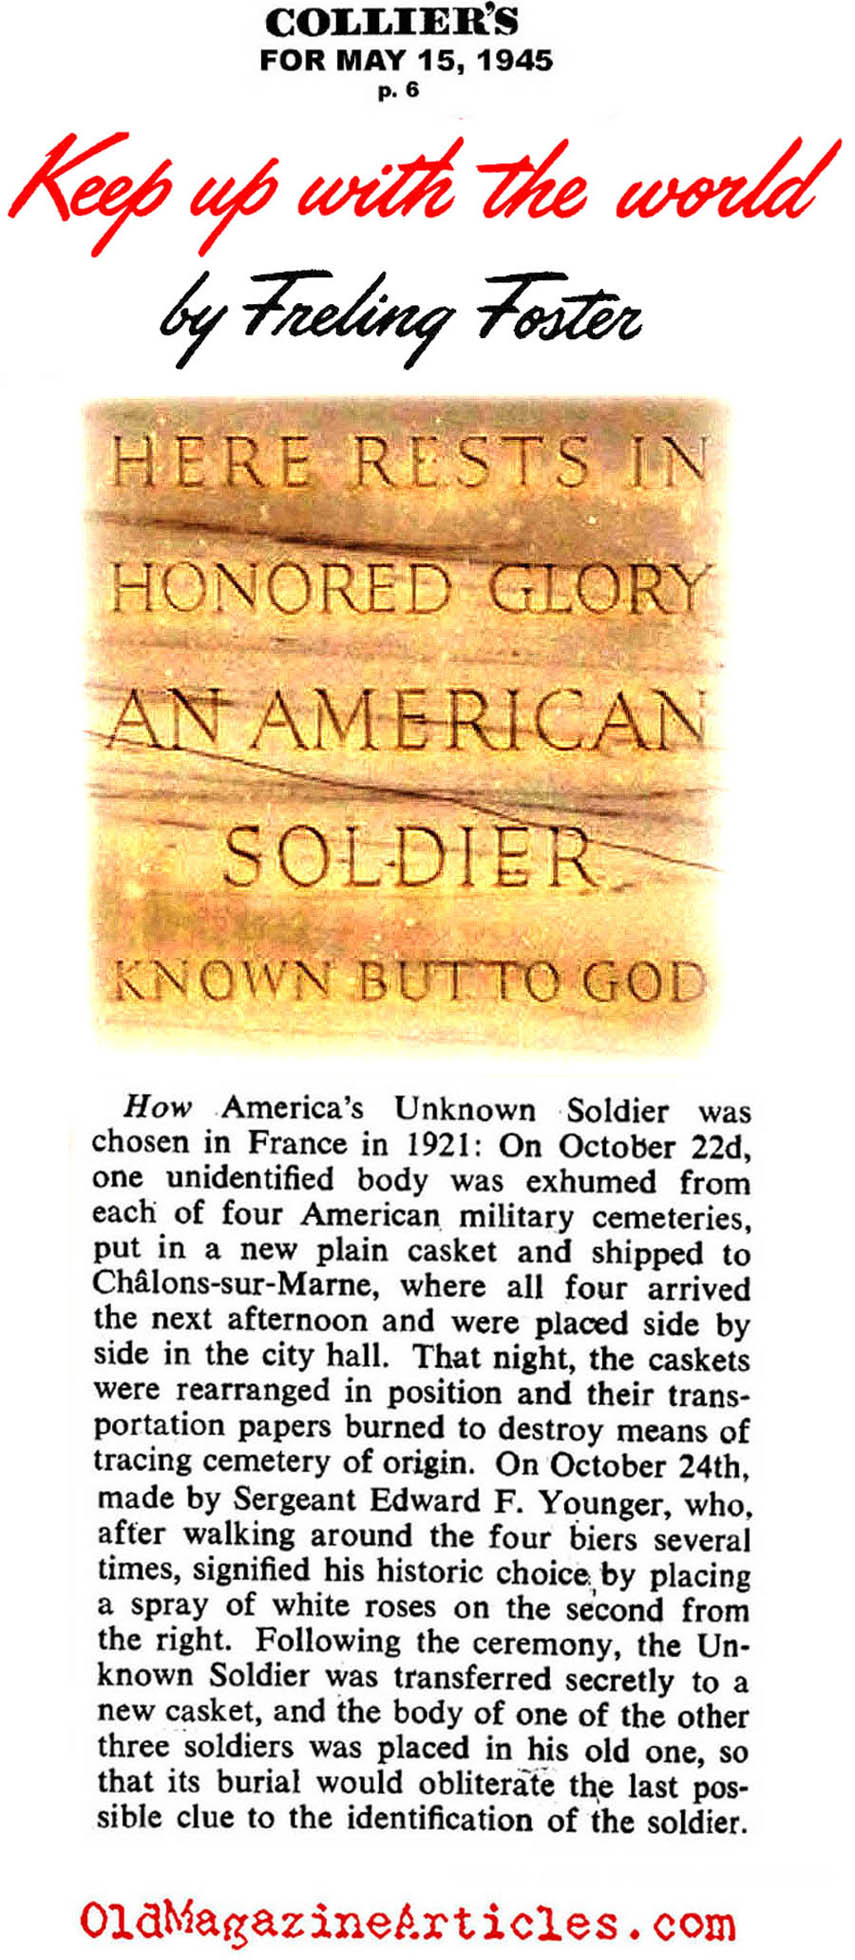 How the W.W. I Unknown Soldier was Selected (Collier's Magazine, 1945)